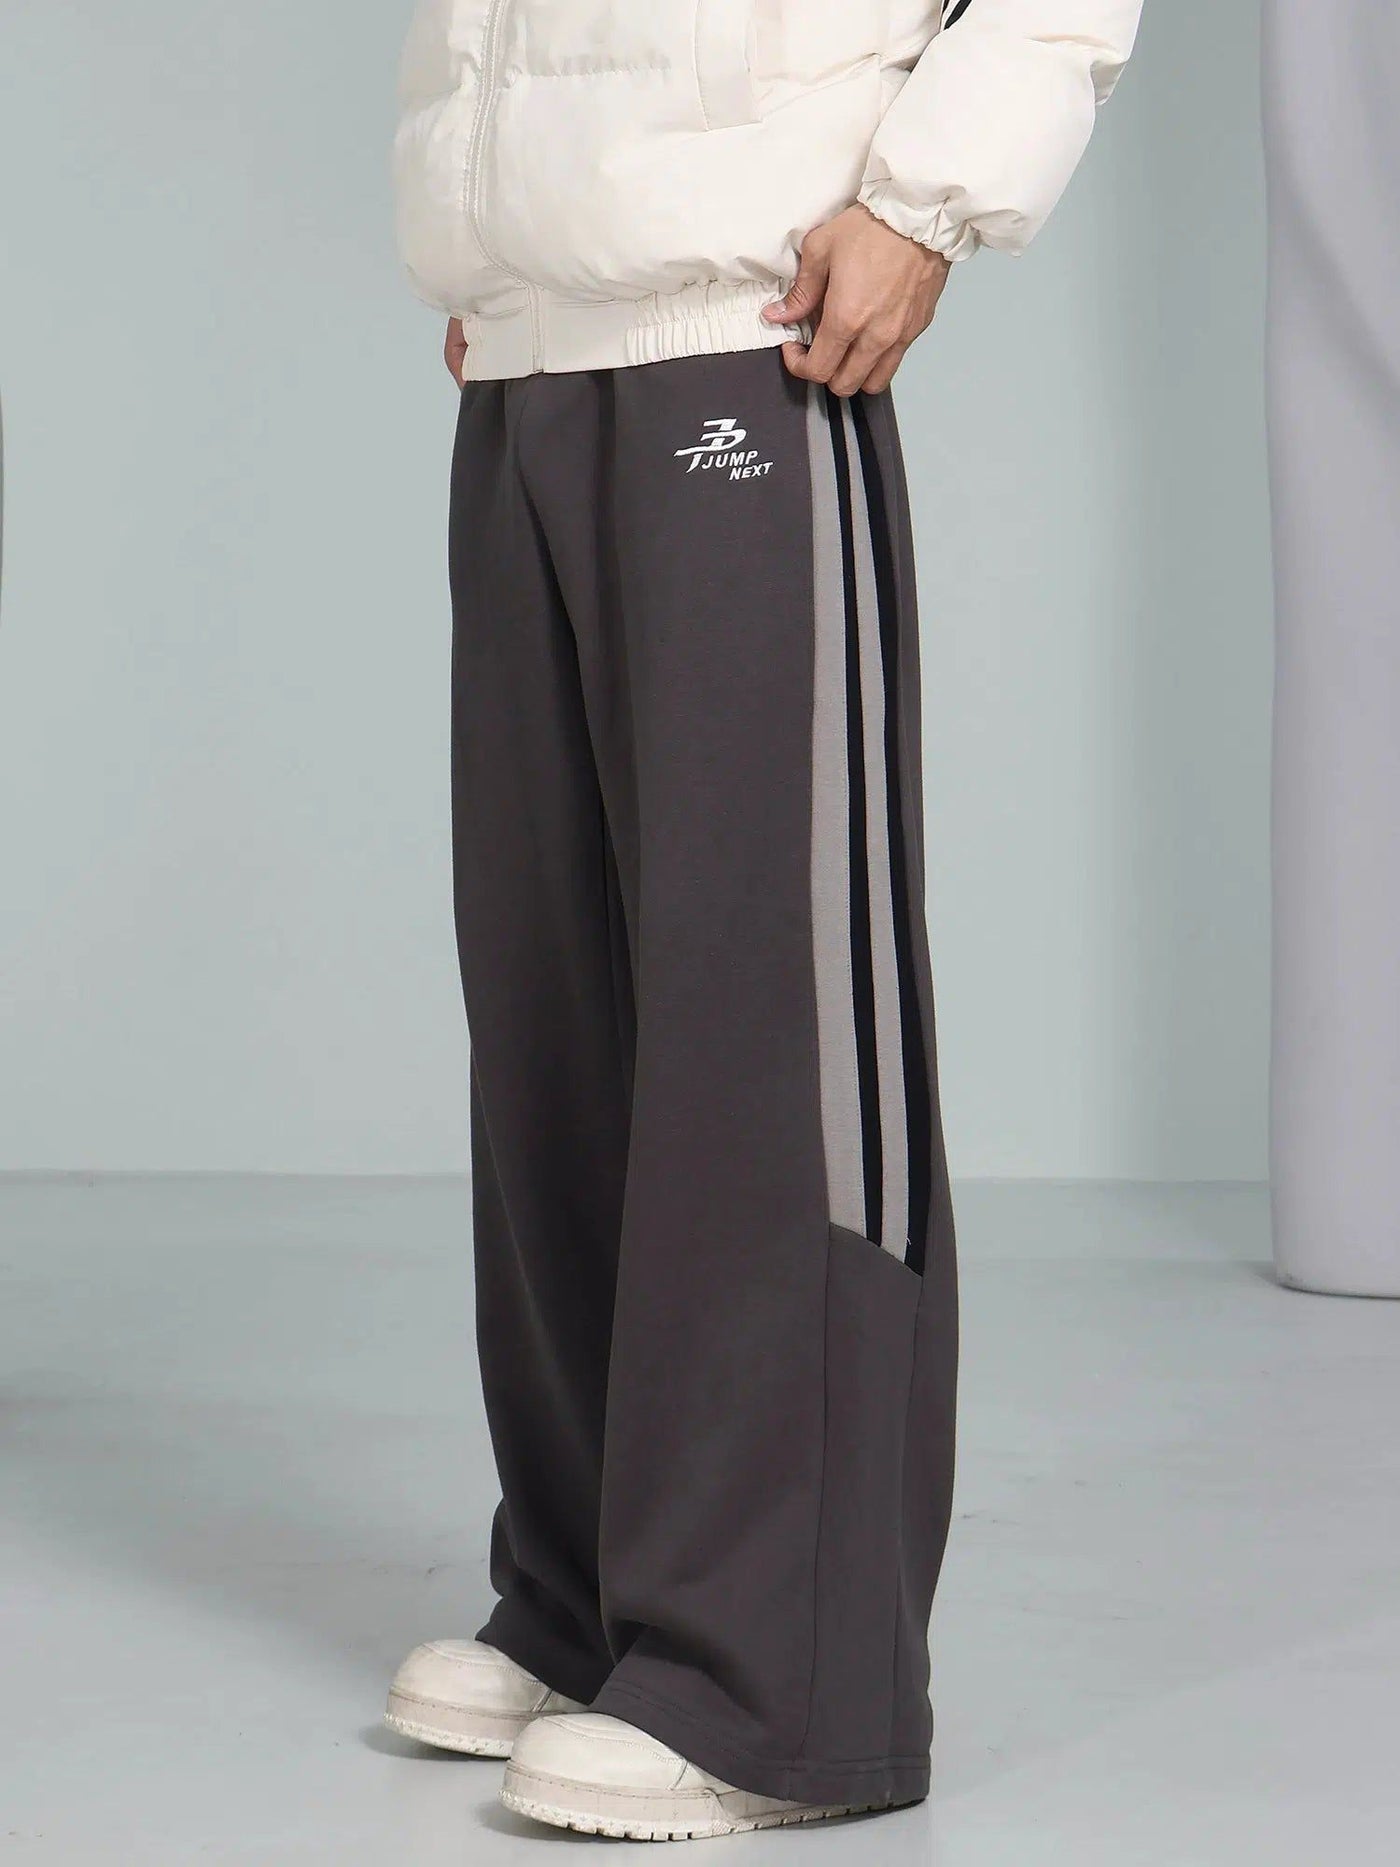 Casual Bootcut Striped Sweatpants Korean Street Fashion Pants By Jump Next Shop Online at OH Vault